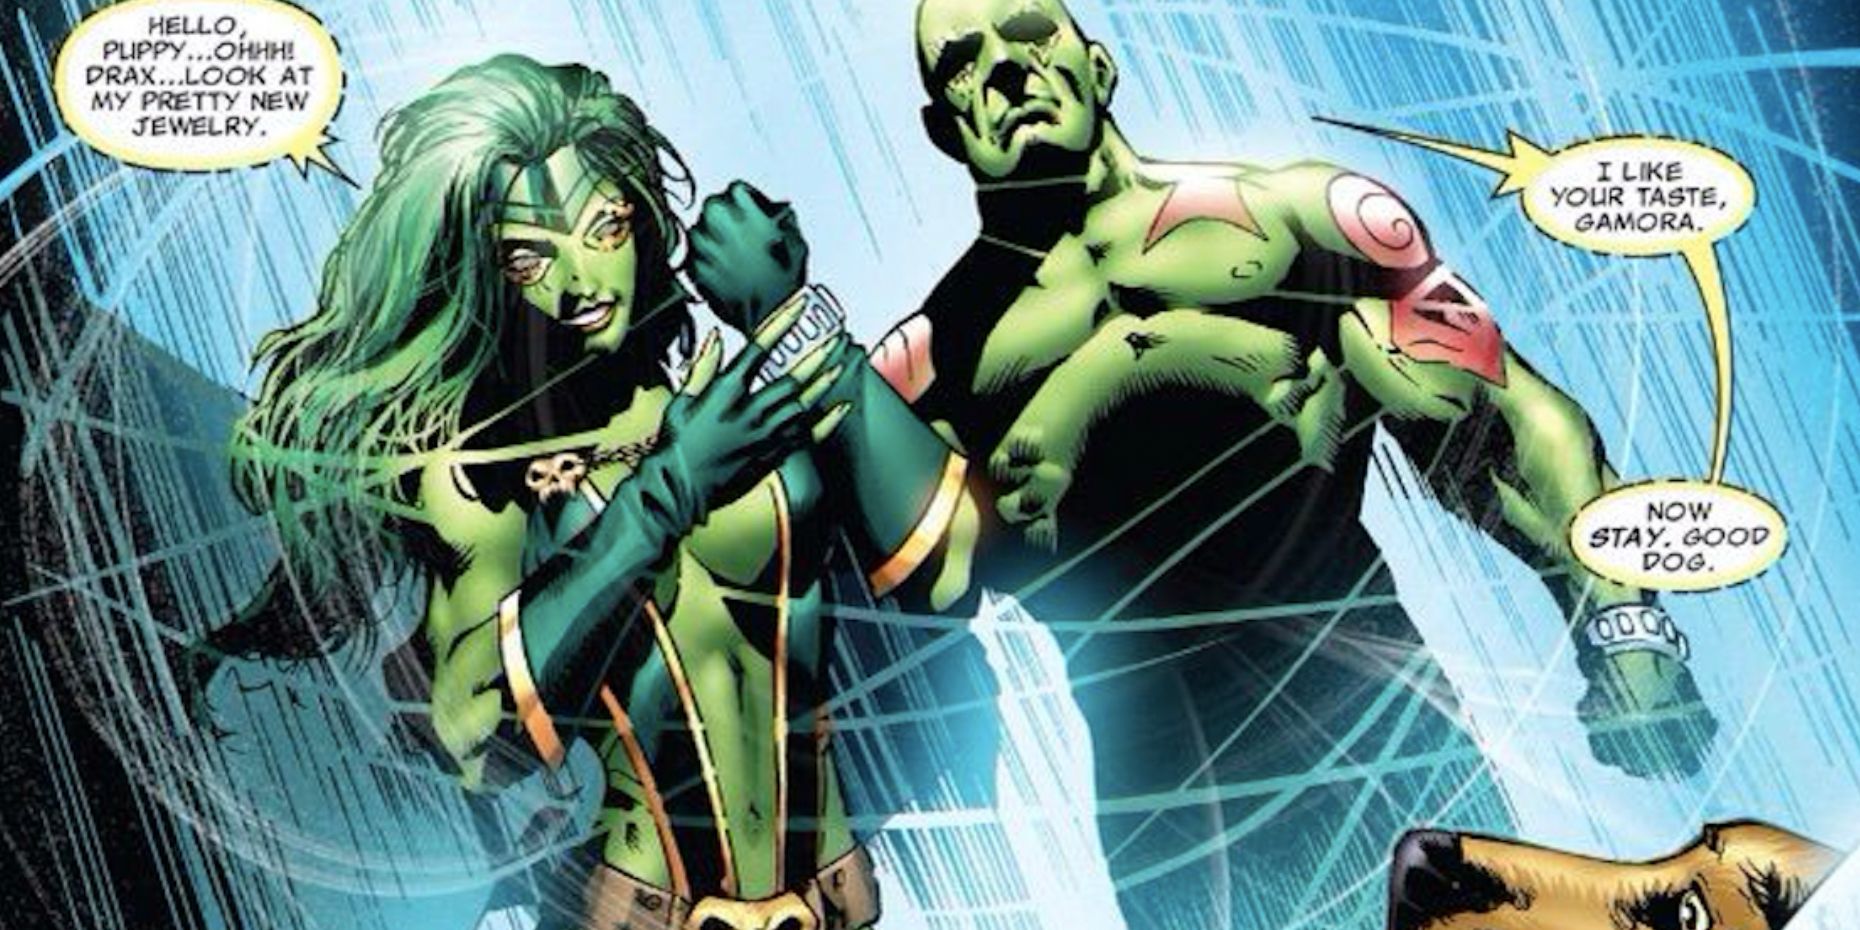 Gamora and Drax meeting Cosmo the Space Dog in Marvel Comics